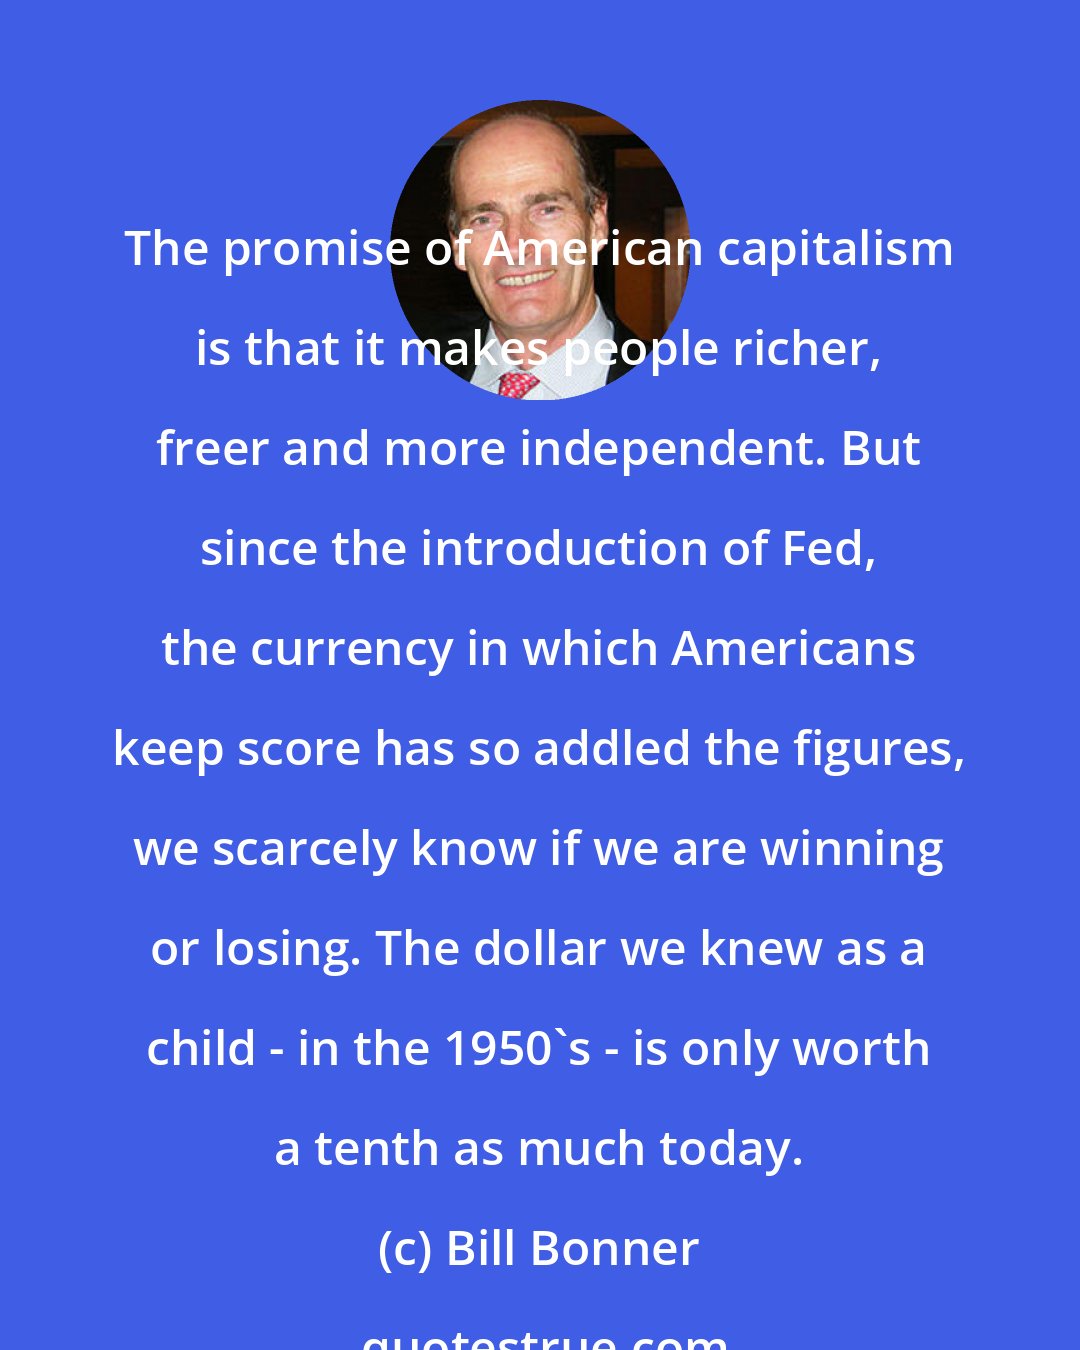 Bill Bonner: The promise of American capitalism is that it makes people richer, freer and more independent. But since the introduction of Fed, the currency in which Americans keep score has so addled the figures, we scarcely know if we are winning or losing. The dollar we knew as a child - in the 1950's - is only worth a tenth as much today.